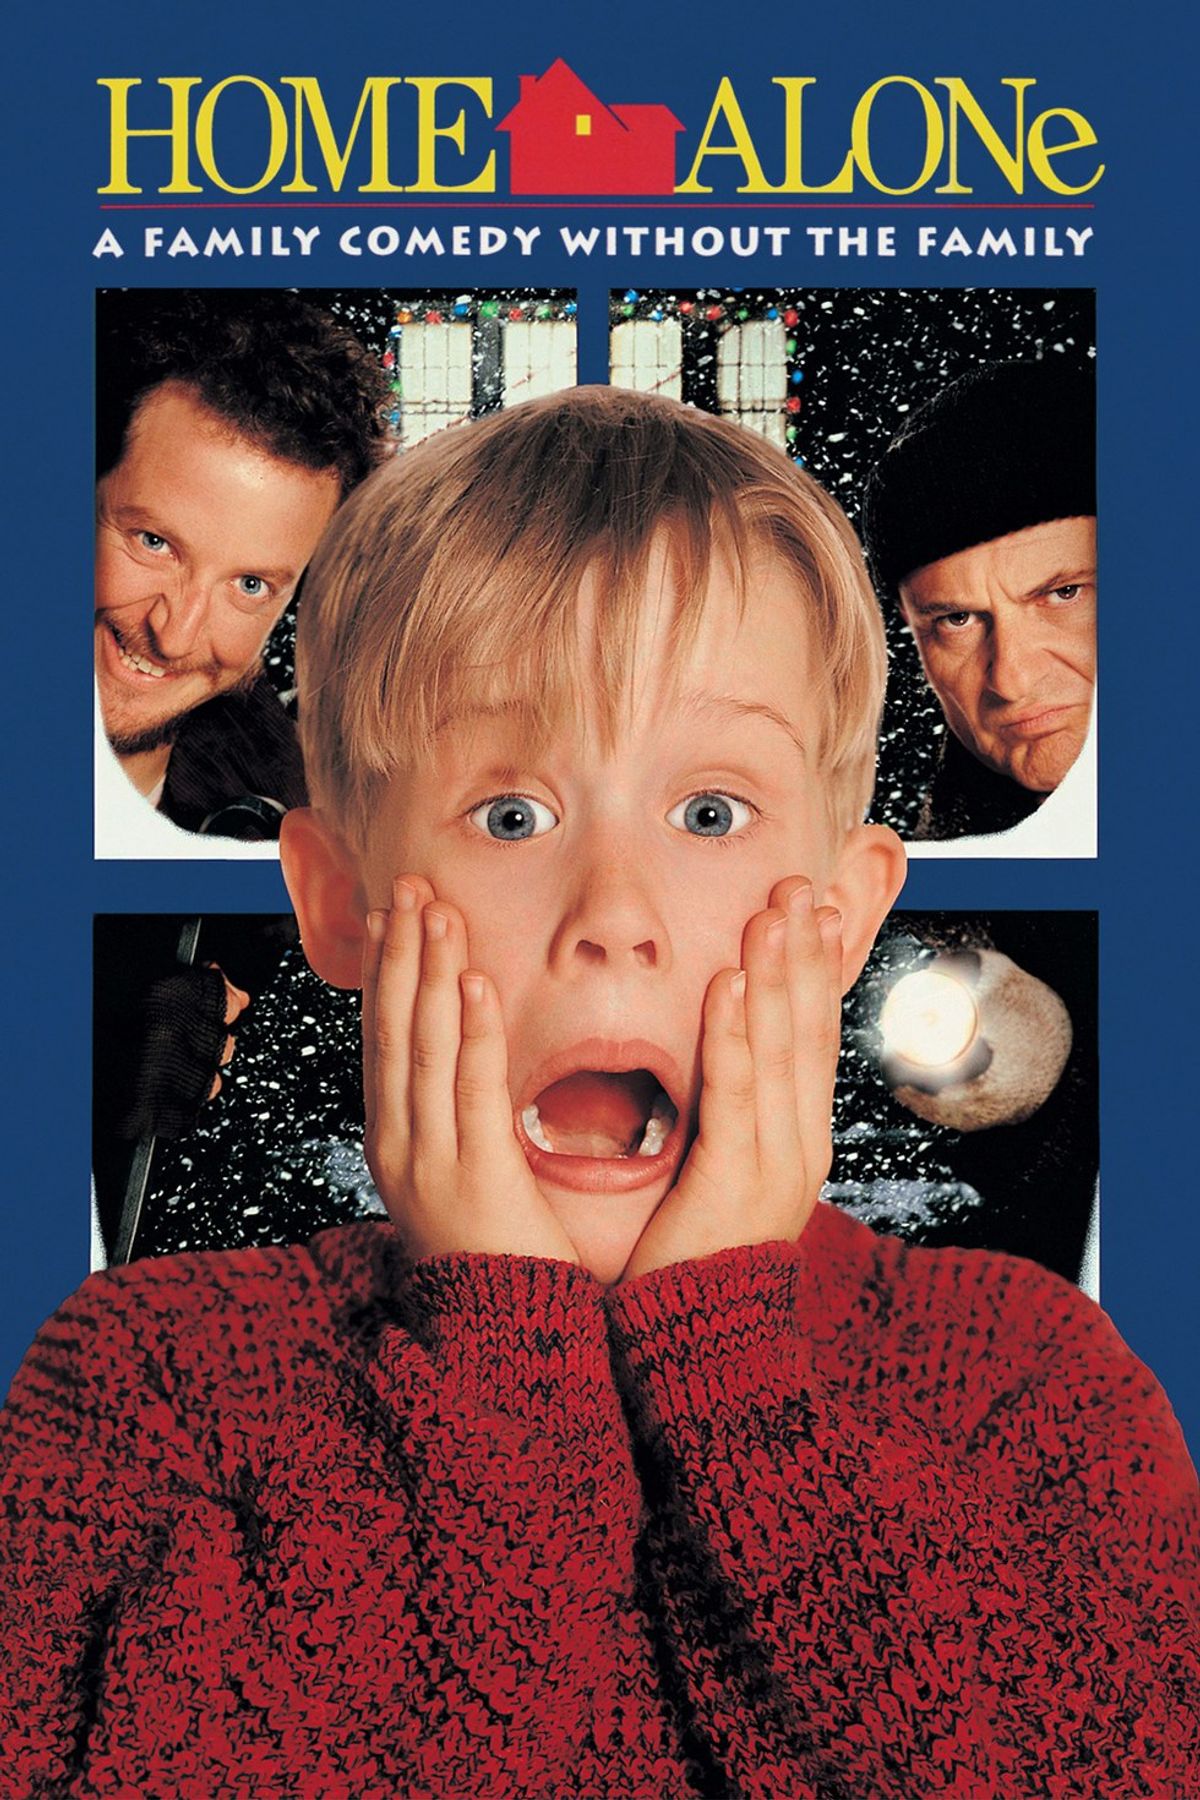 Our Favorite Holiday Movies